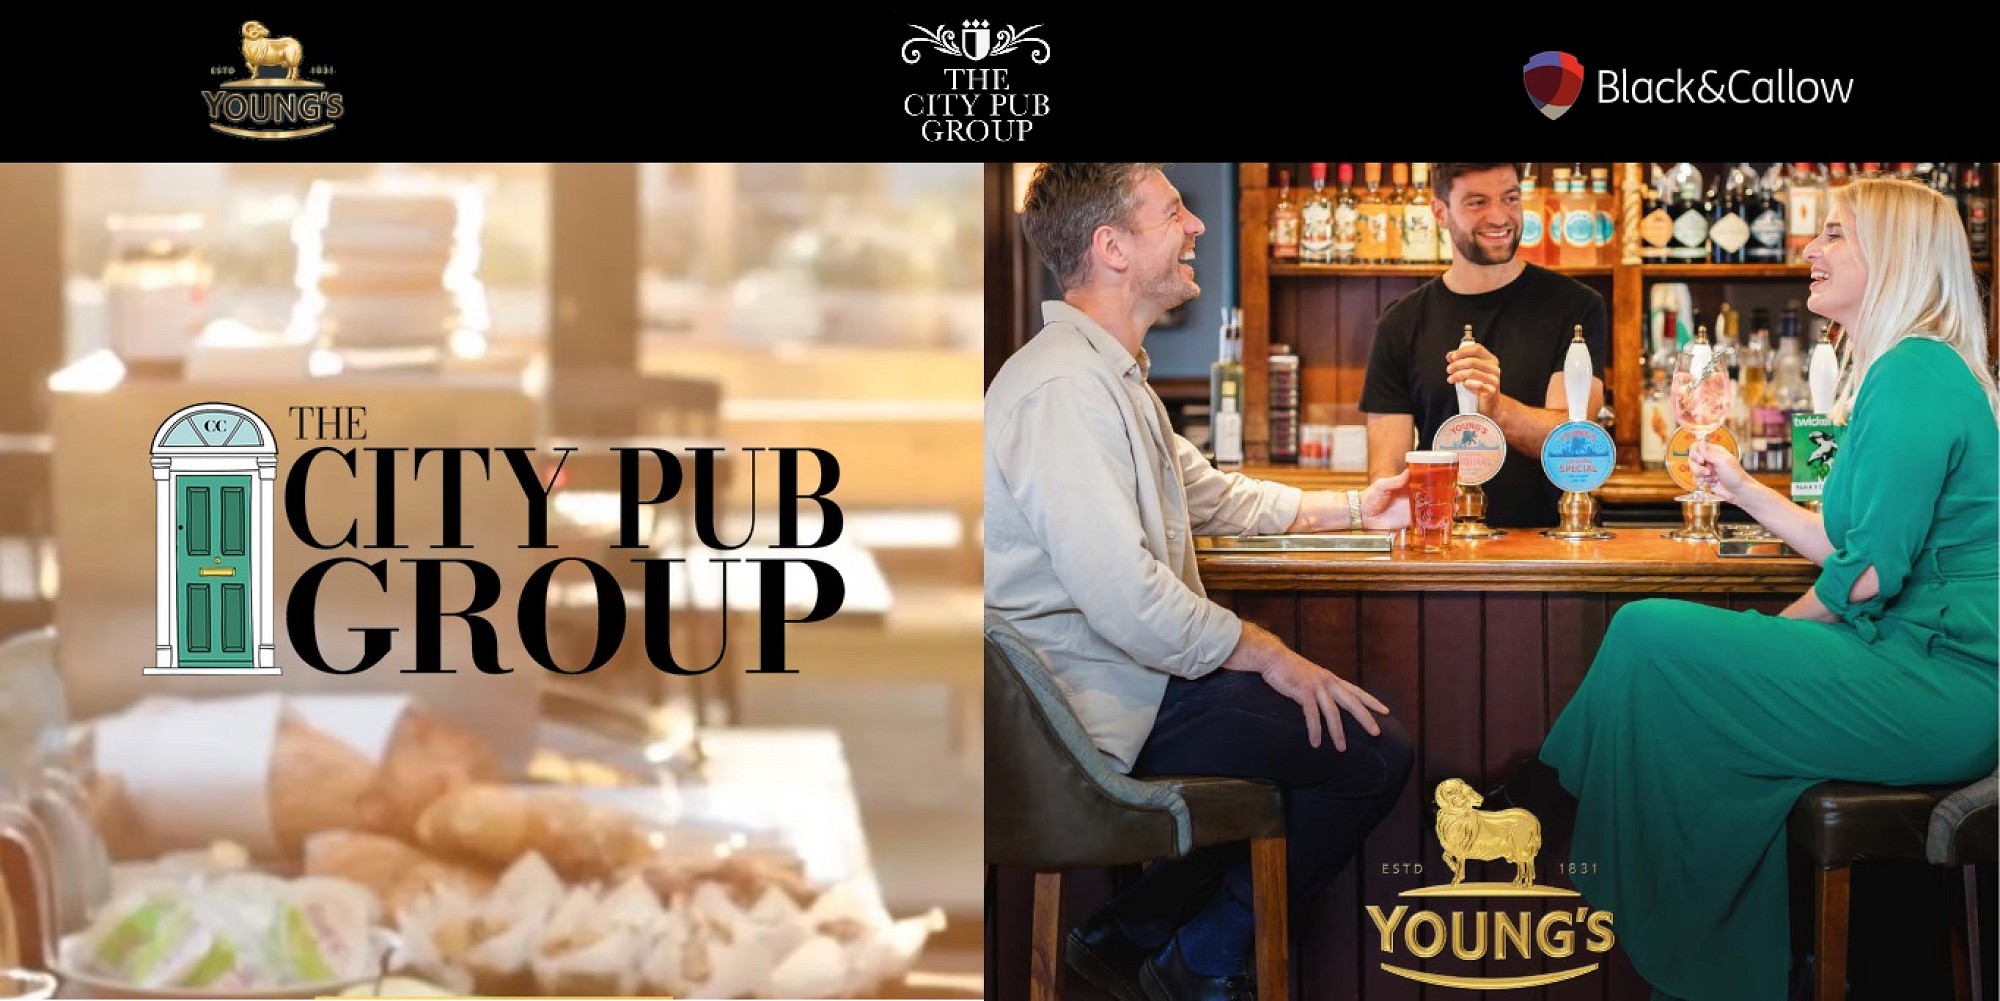 What's brewing? B&C helps Young's £162m acquisition of City Pub Group